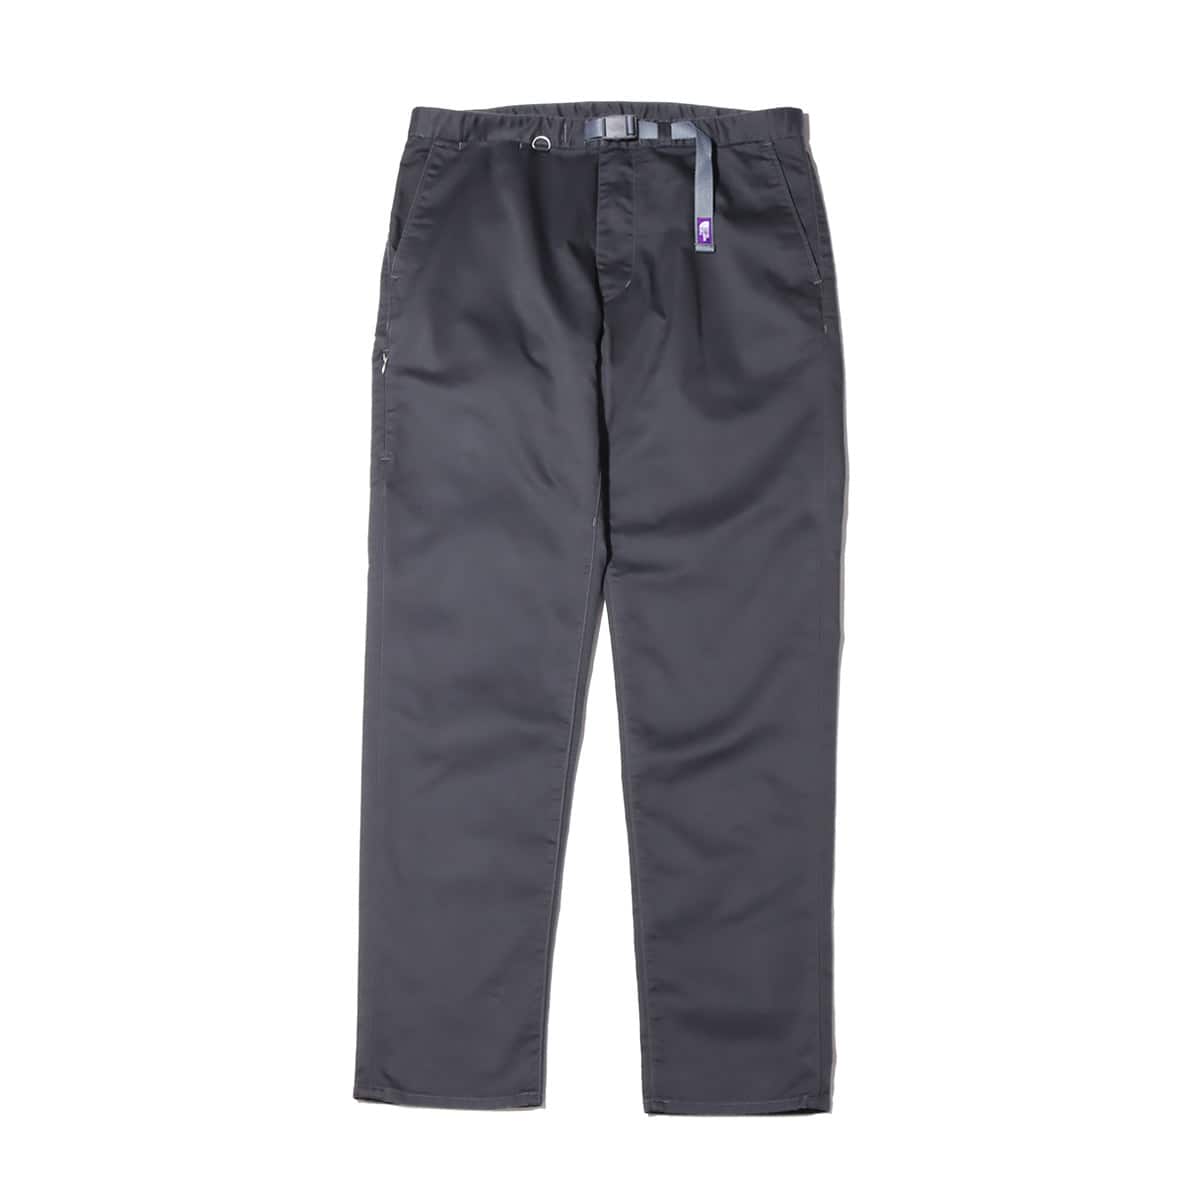 THE NORTH FACE PURPLE LABEL Stretch Twill Tapered Pants Dim Gray 22SS-I